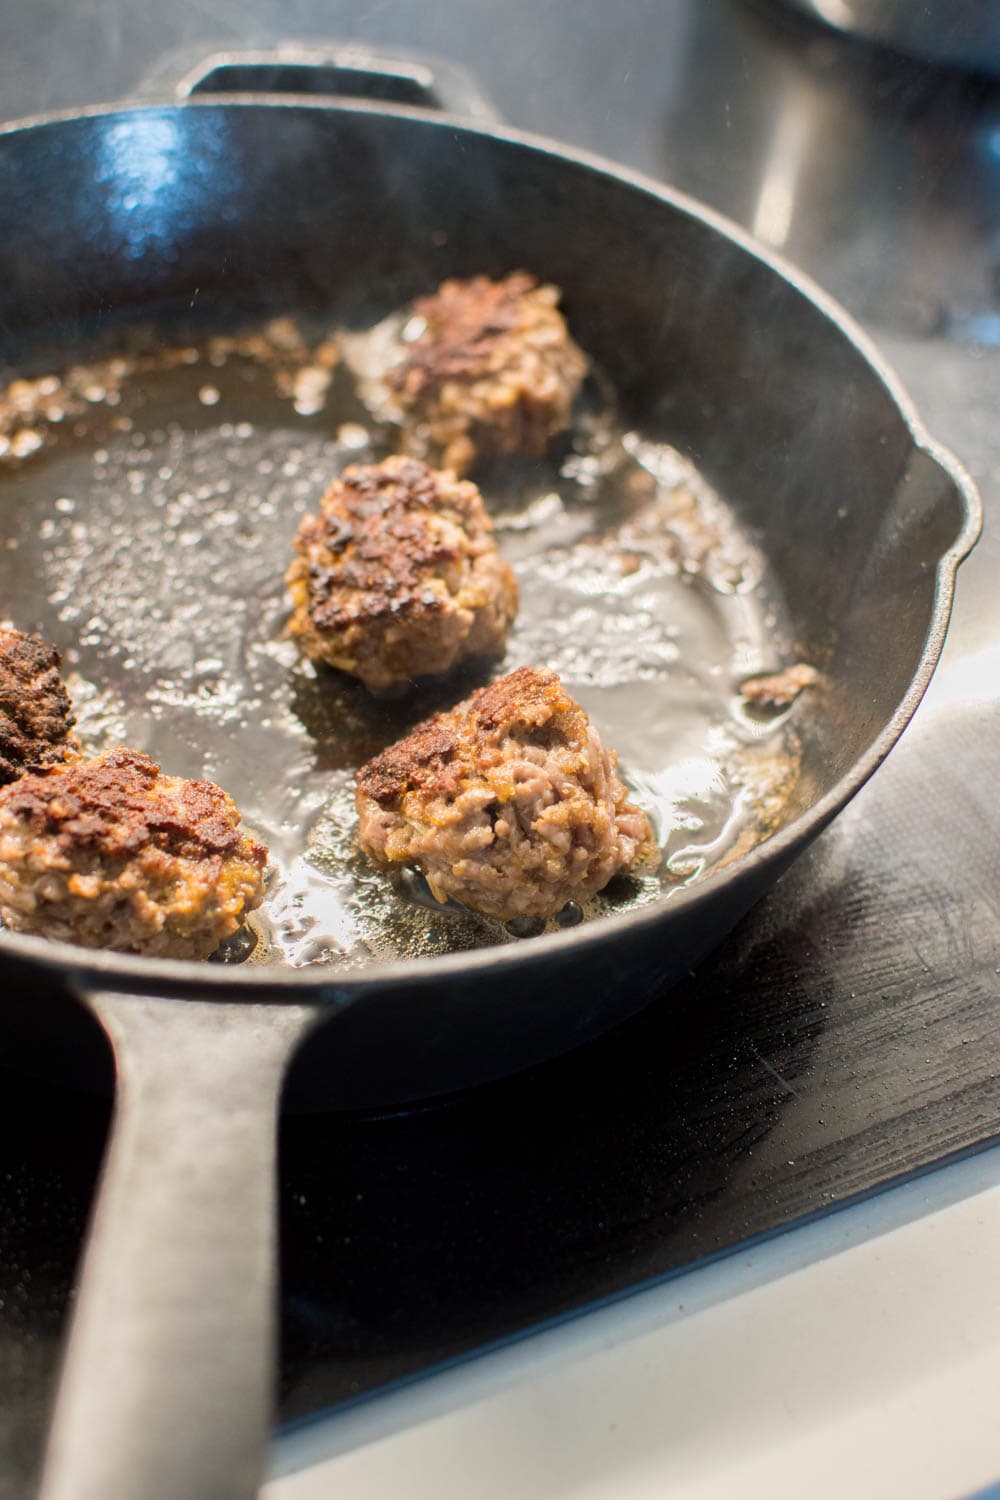 Swedish meatballs cooking in a cast-iron skillet